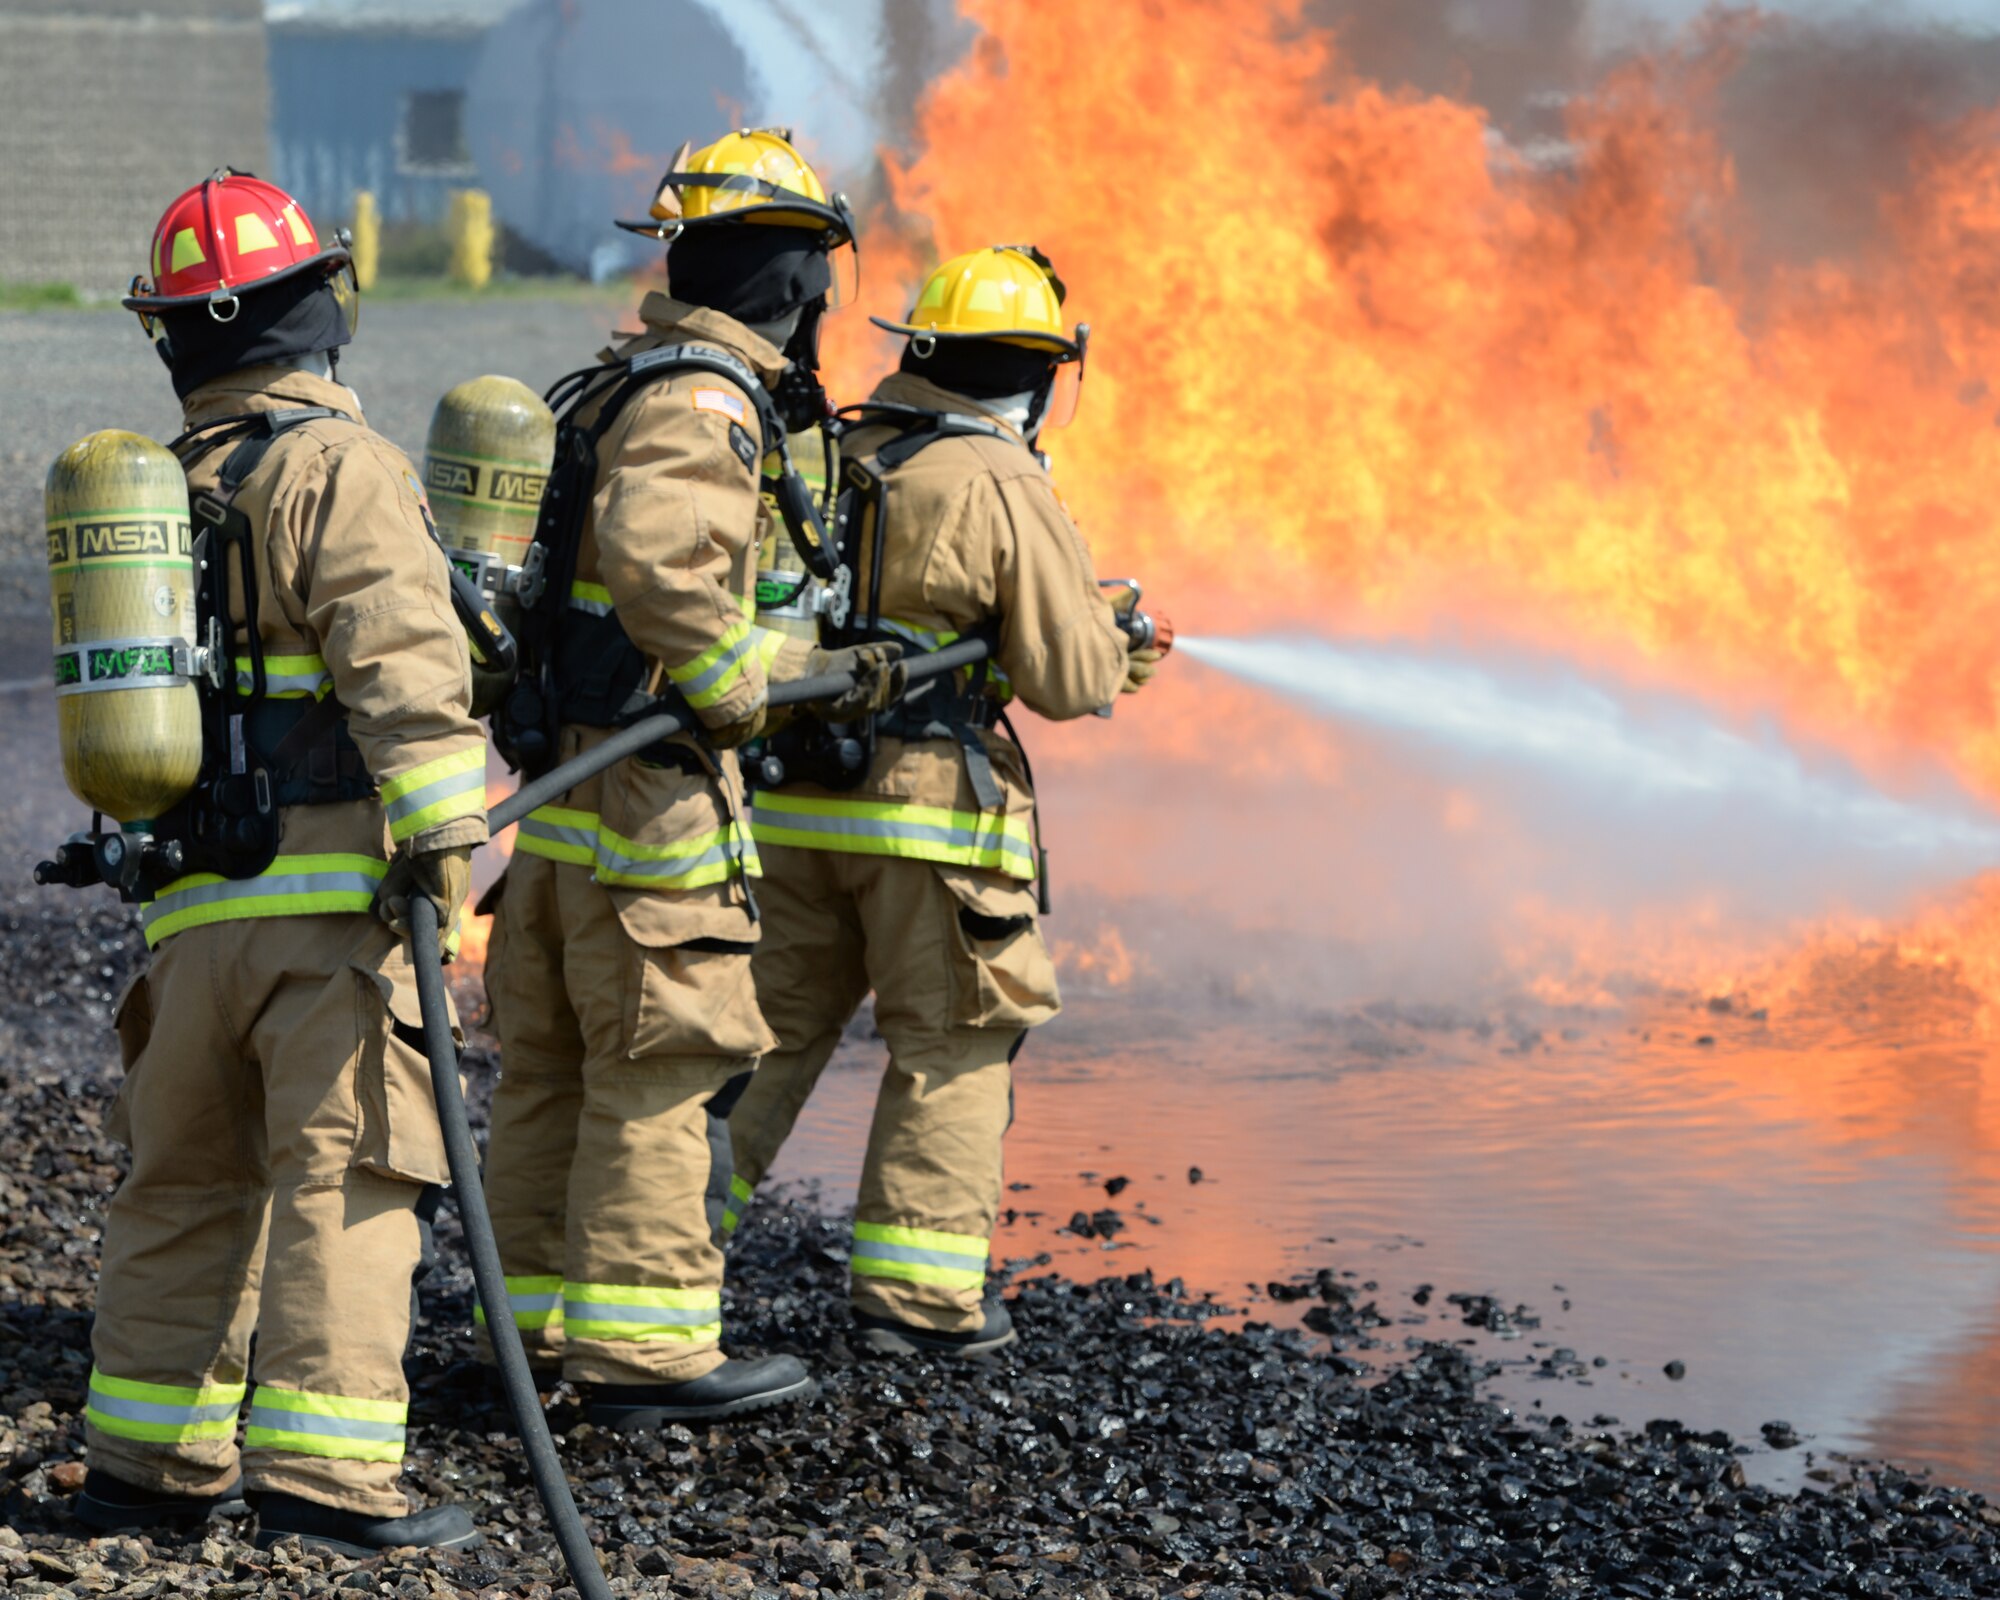 Aircraft rescue firefighters from the 157th Civil Engineer Squadron, Pease Air National Guard Base, N.H., use a handline to extinguish a simulated aircraft structural fire at Logan International Airport, Boston, May 12, 2016.  This is type of training is annual requirement for the firefighters.  (U.S. Air National Guard photo by Staff Sgt. Curtis J. Lenz)